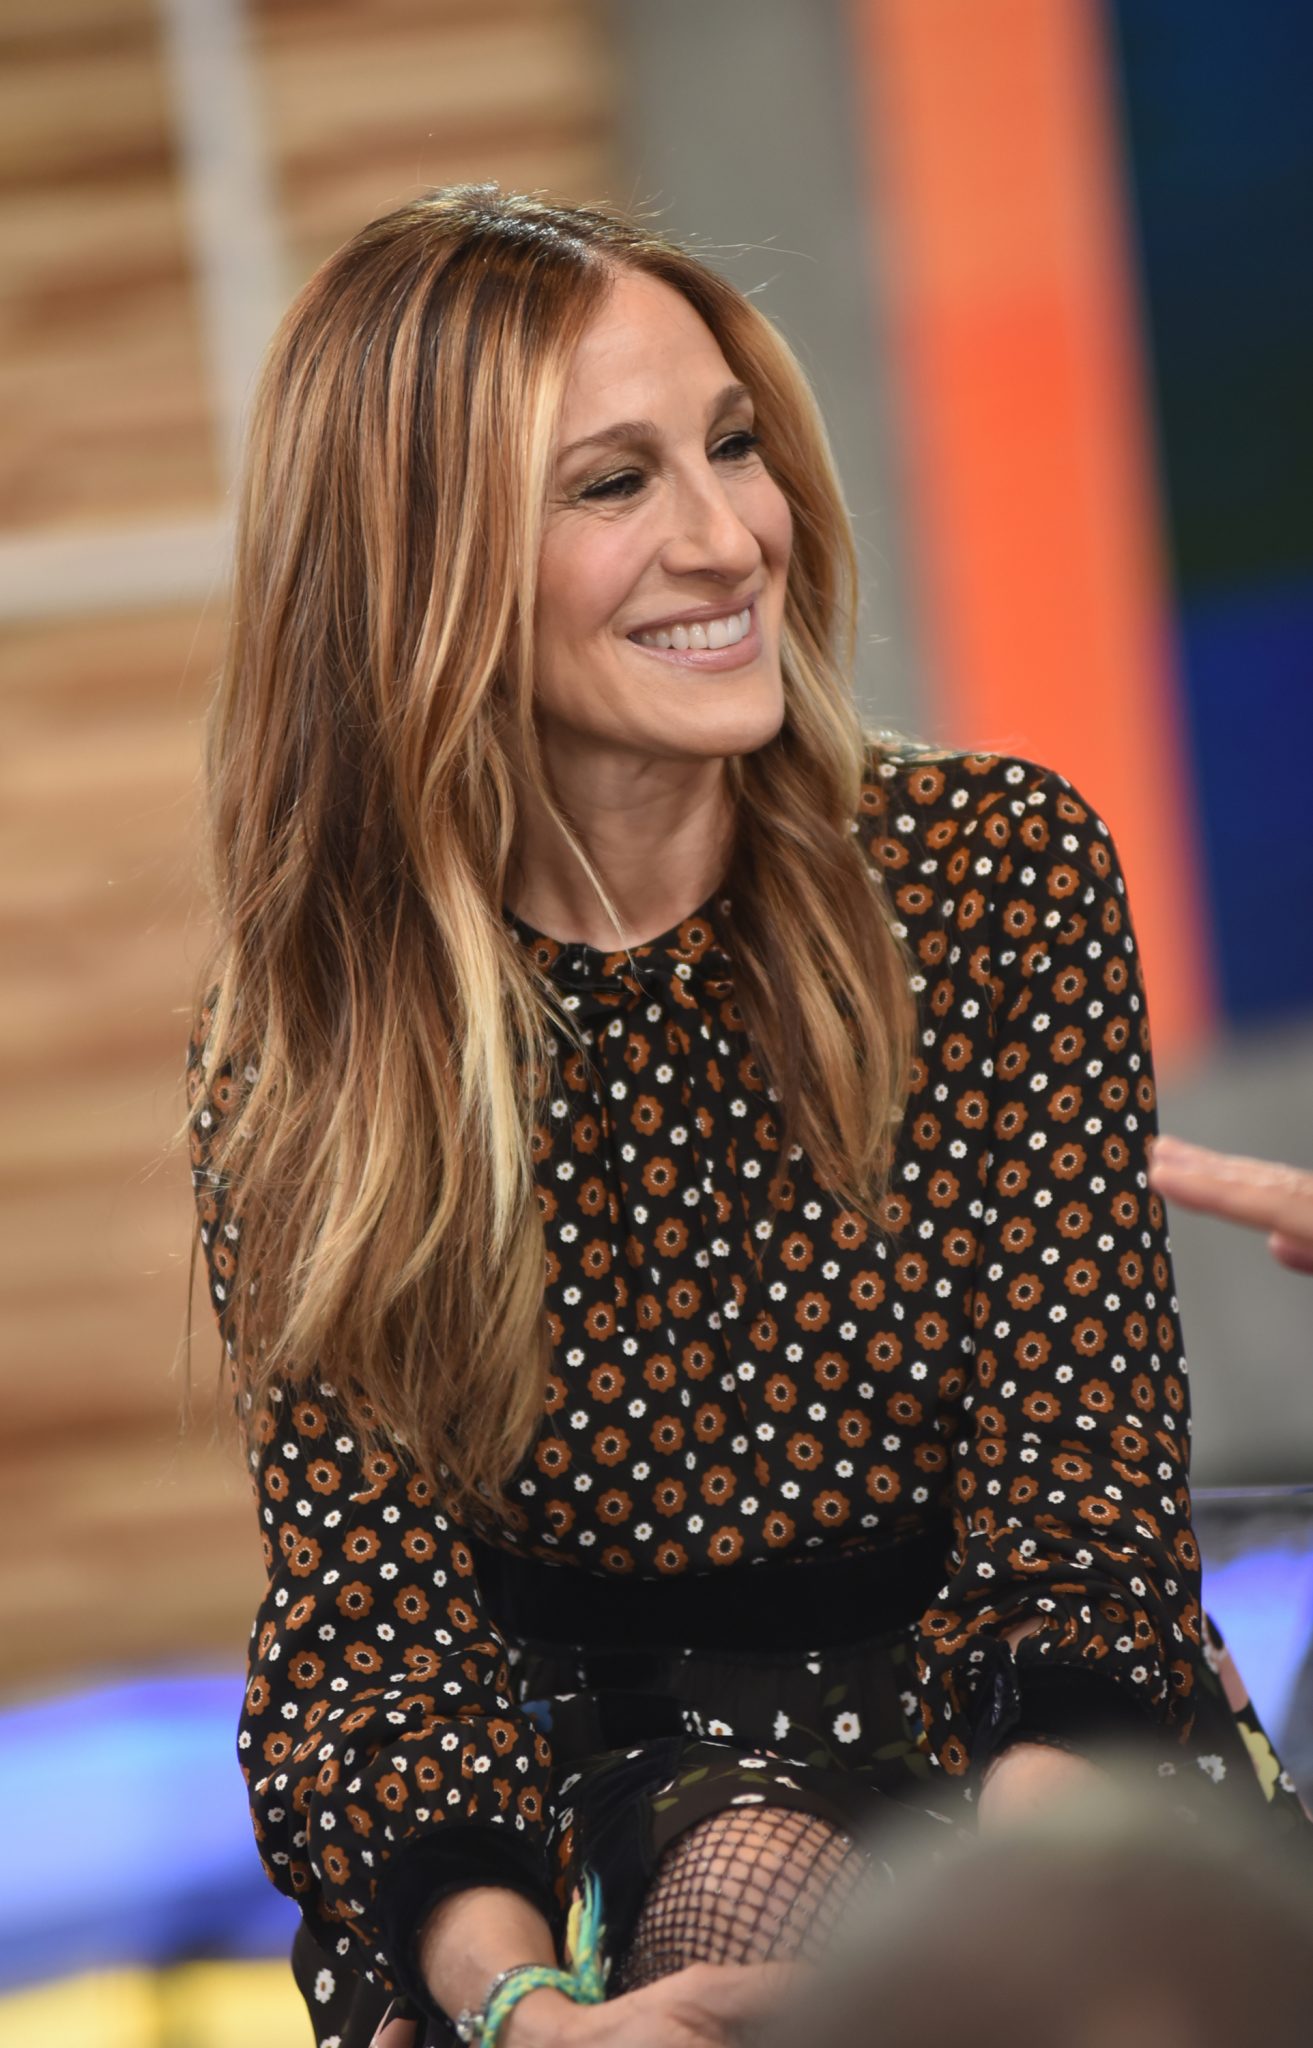 In Case You Missed It: Sarah Jessica Parker On Good Morning America